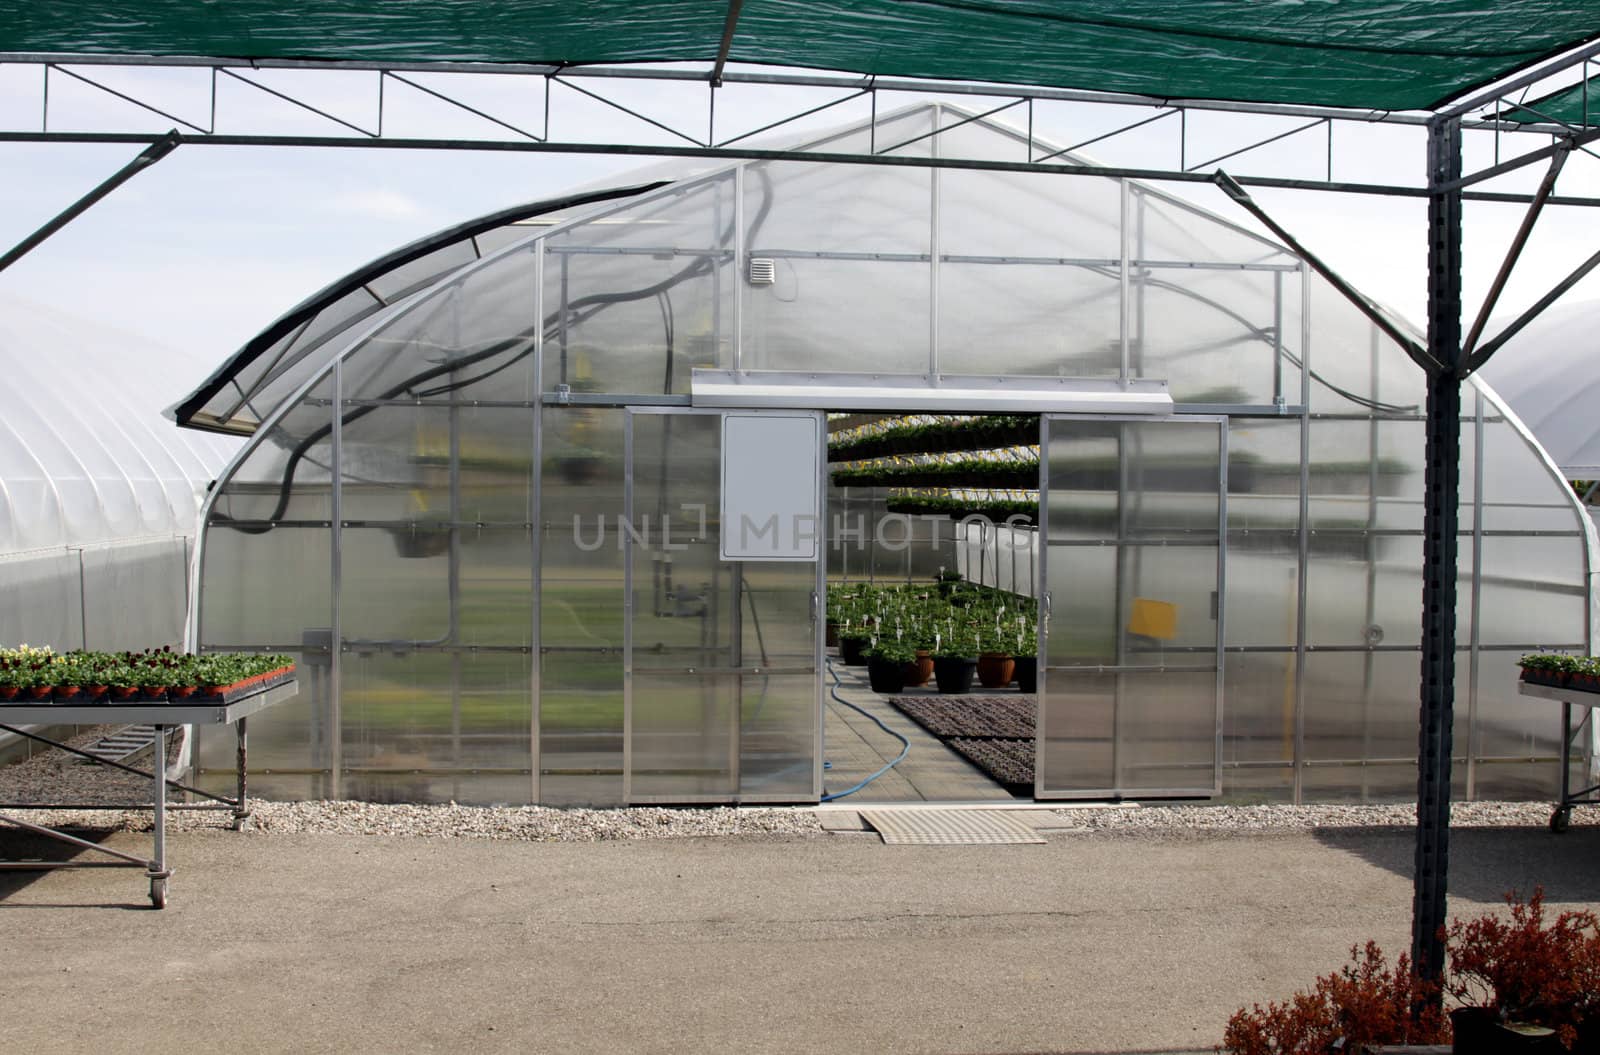 Greenhouse at a Nursery by ca2hill